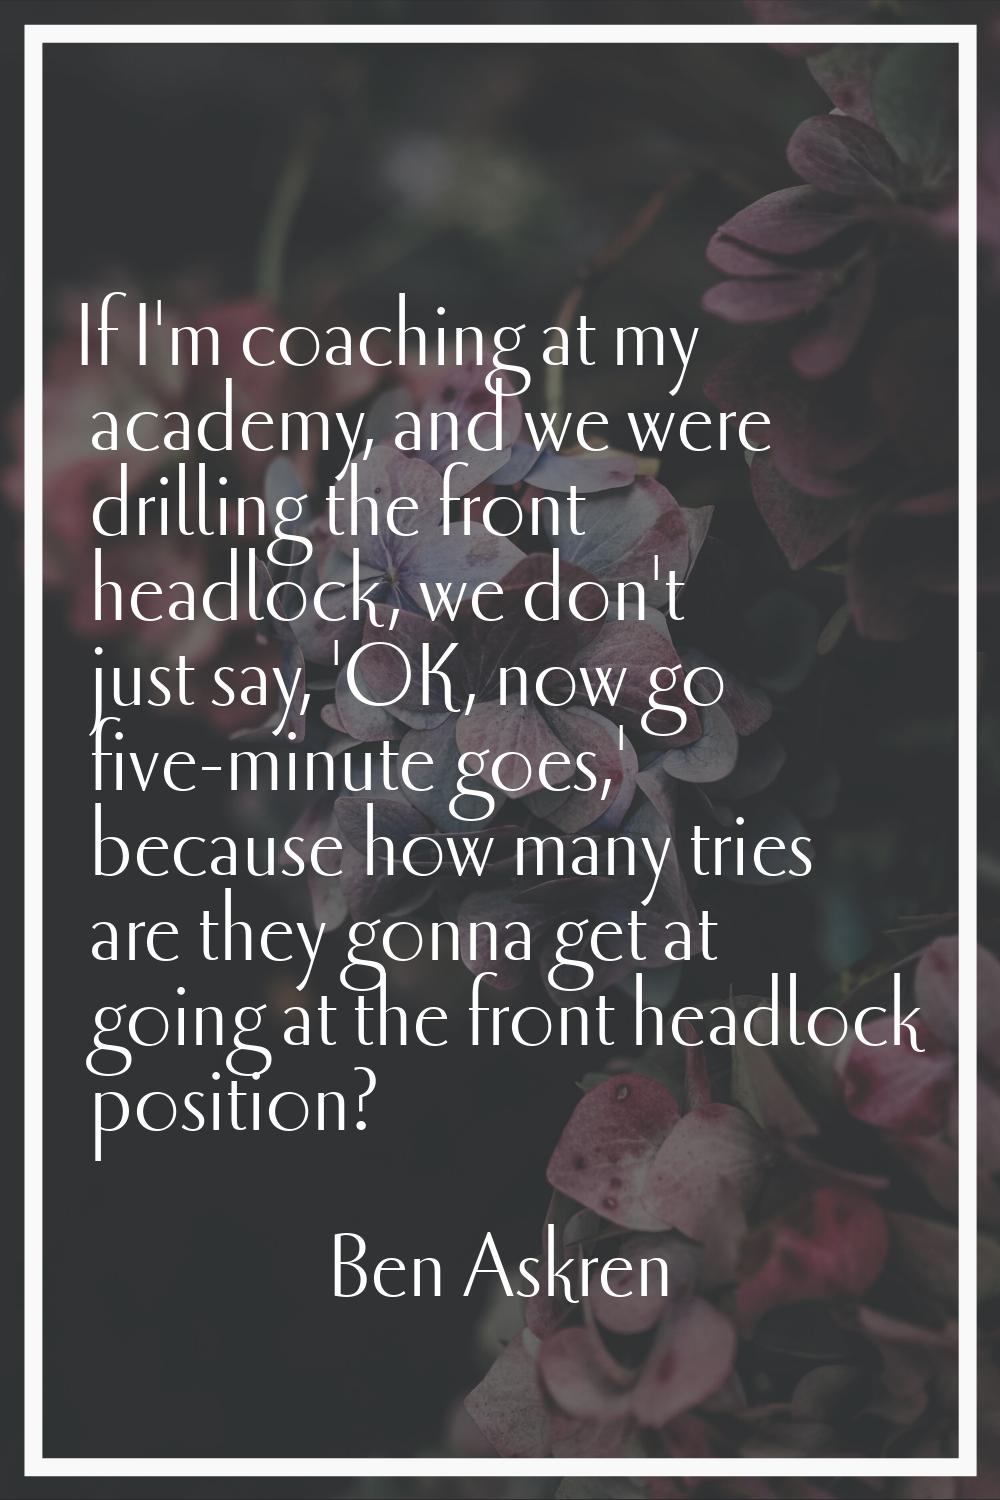 If I'm coaching at my academy, and we were drilling the front headlock, we don't just say, 'OK, now